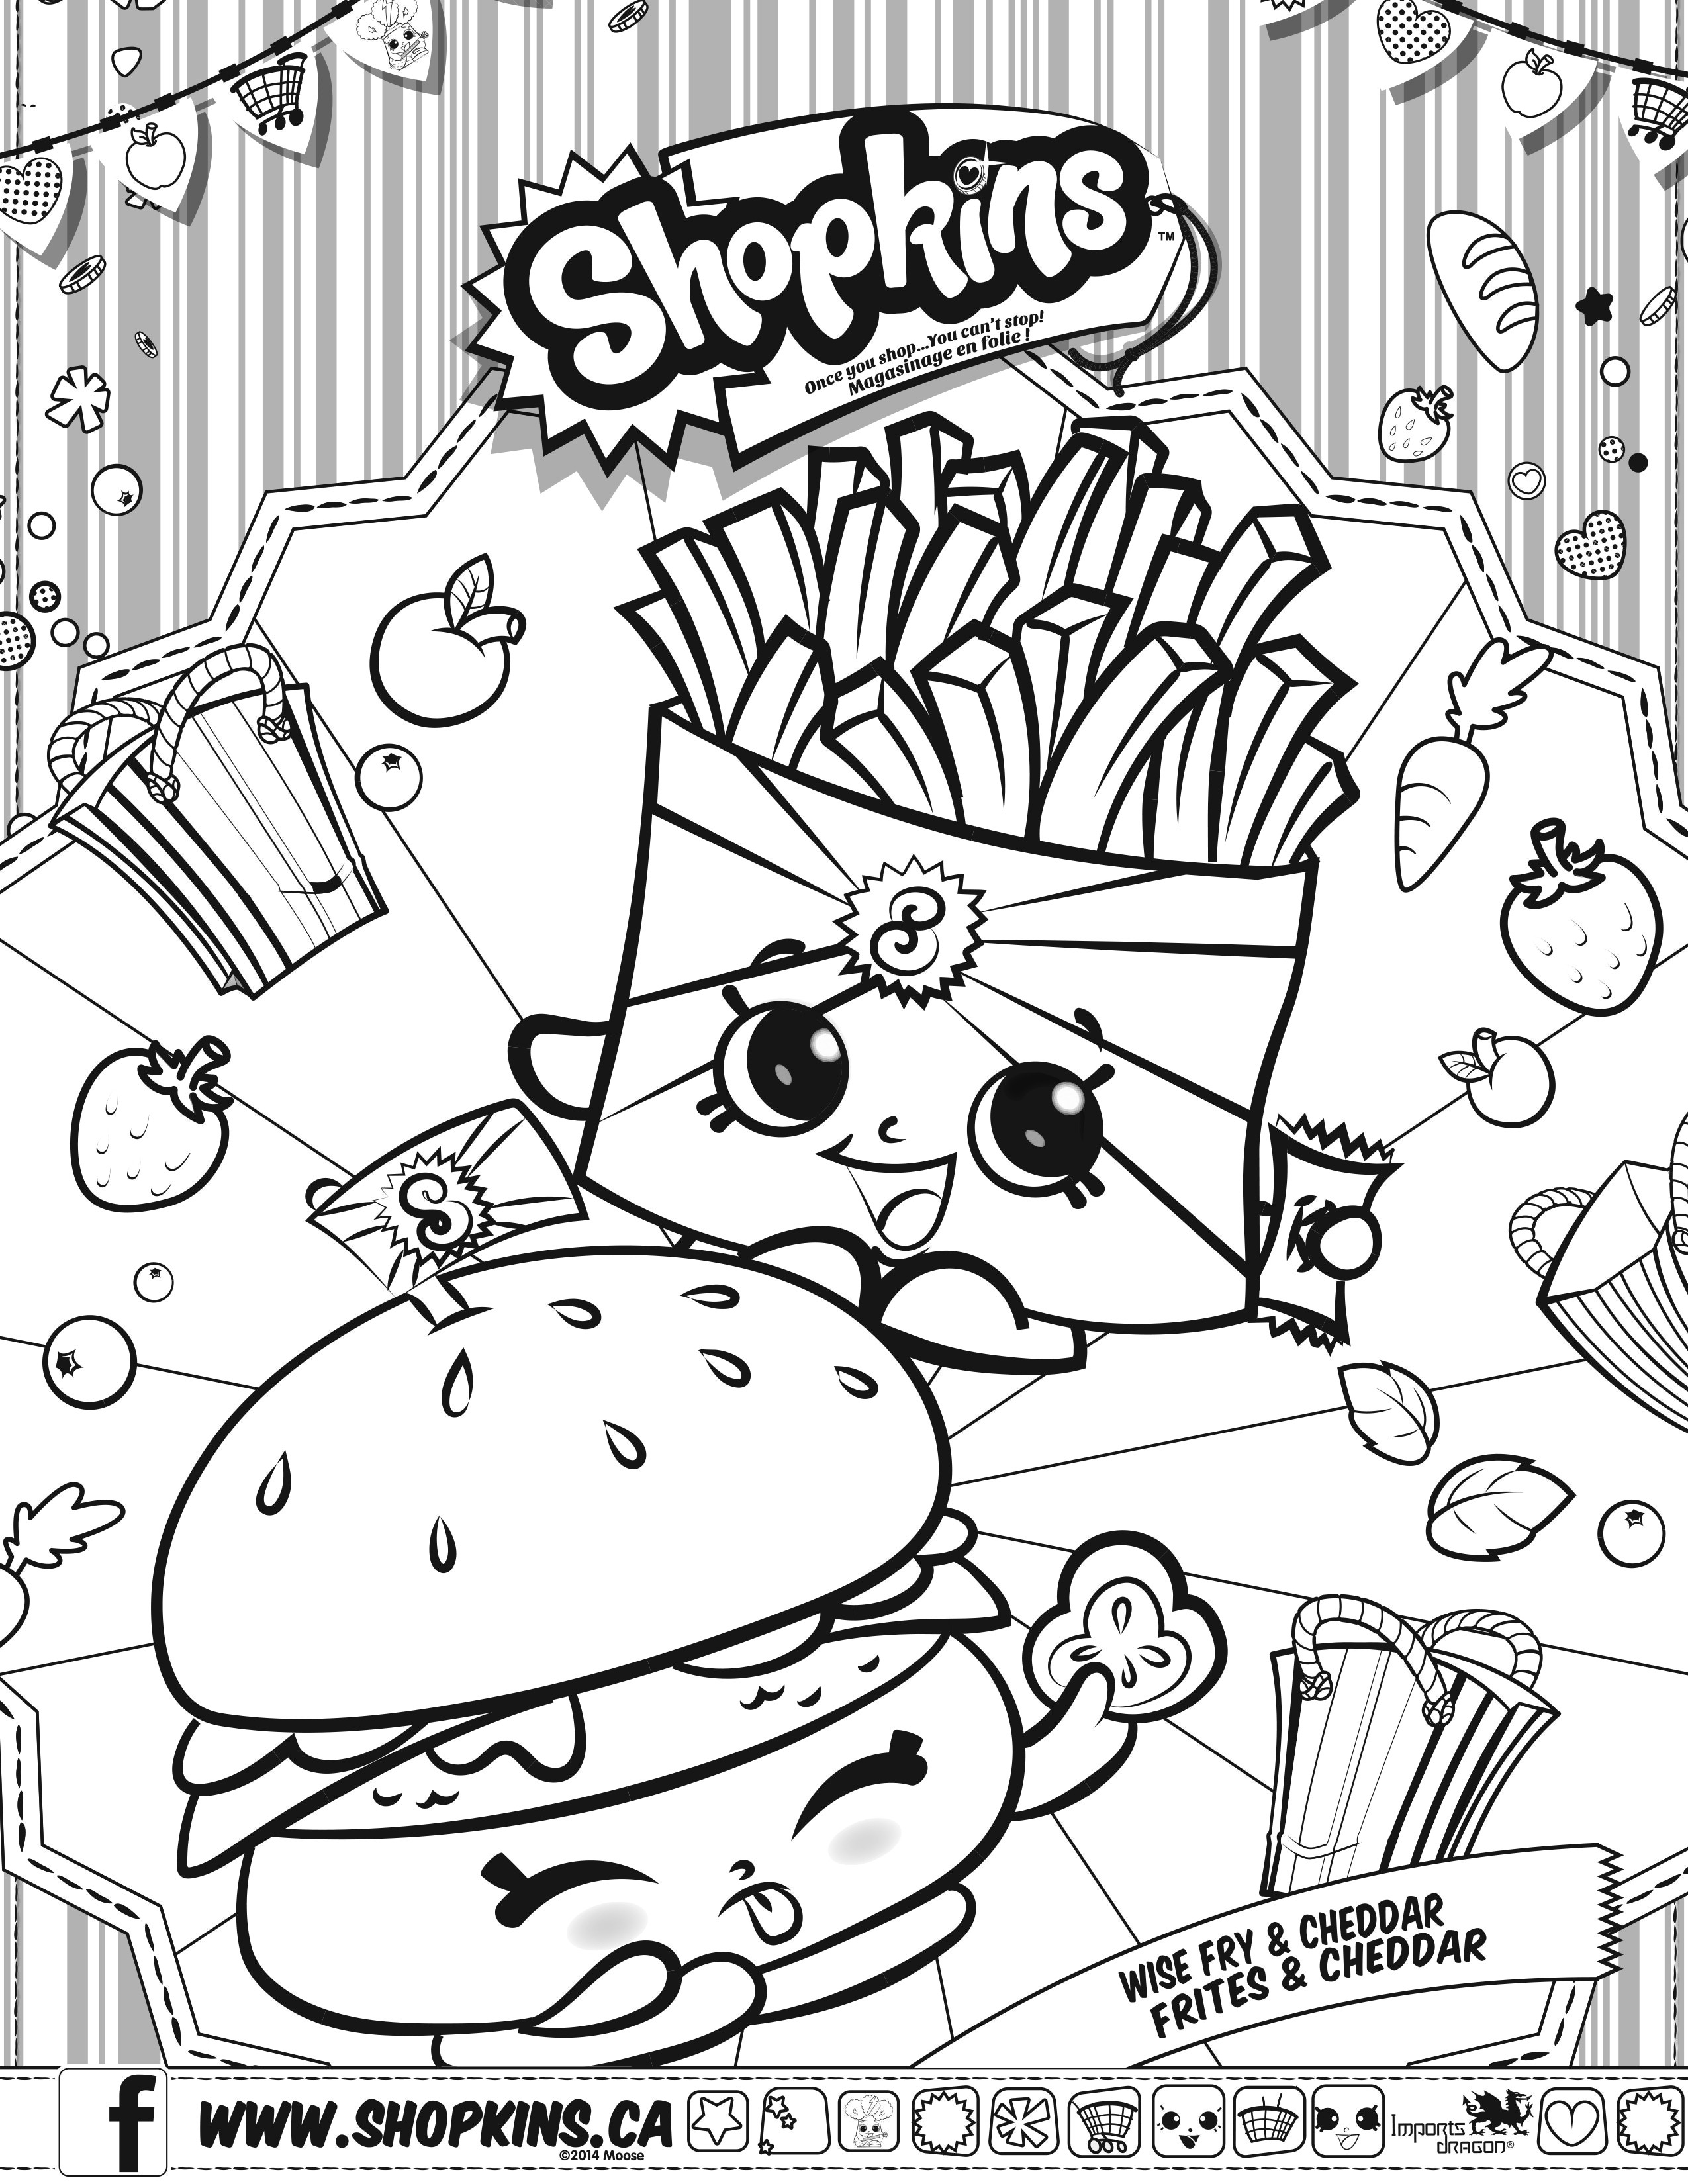 Www Shopkins Coloring Pages at GetColorings.com | Free printable ...